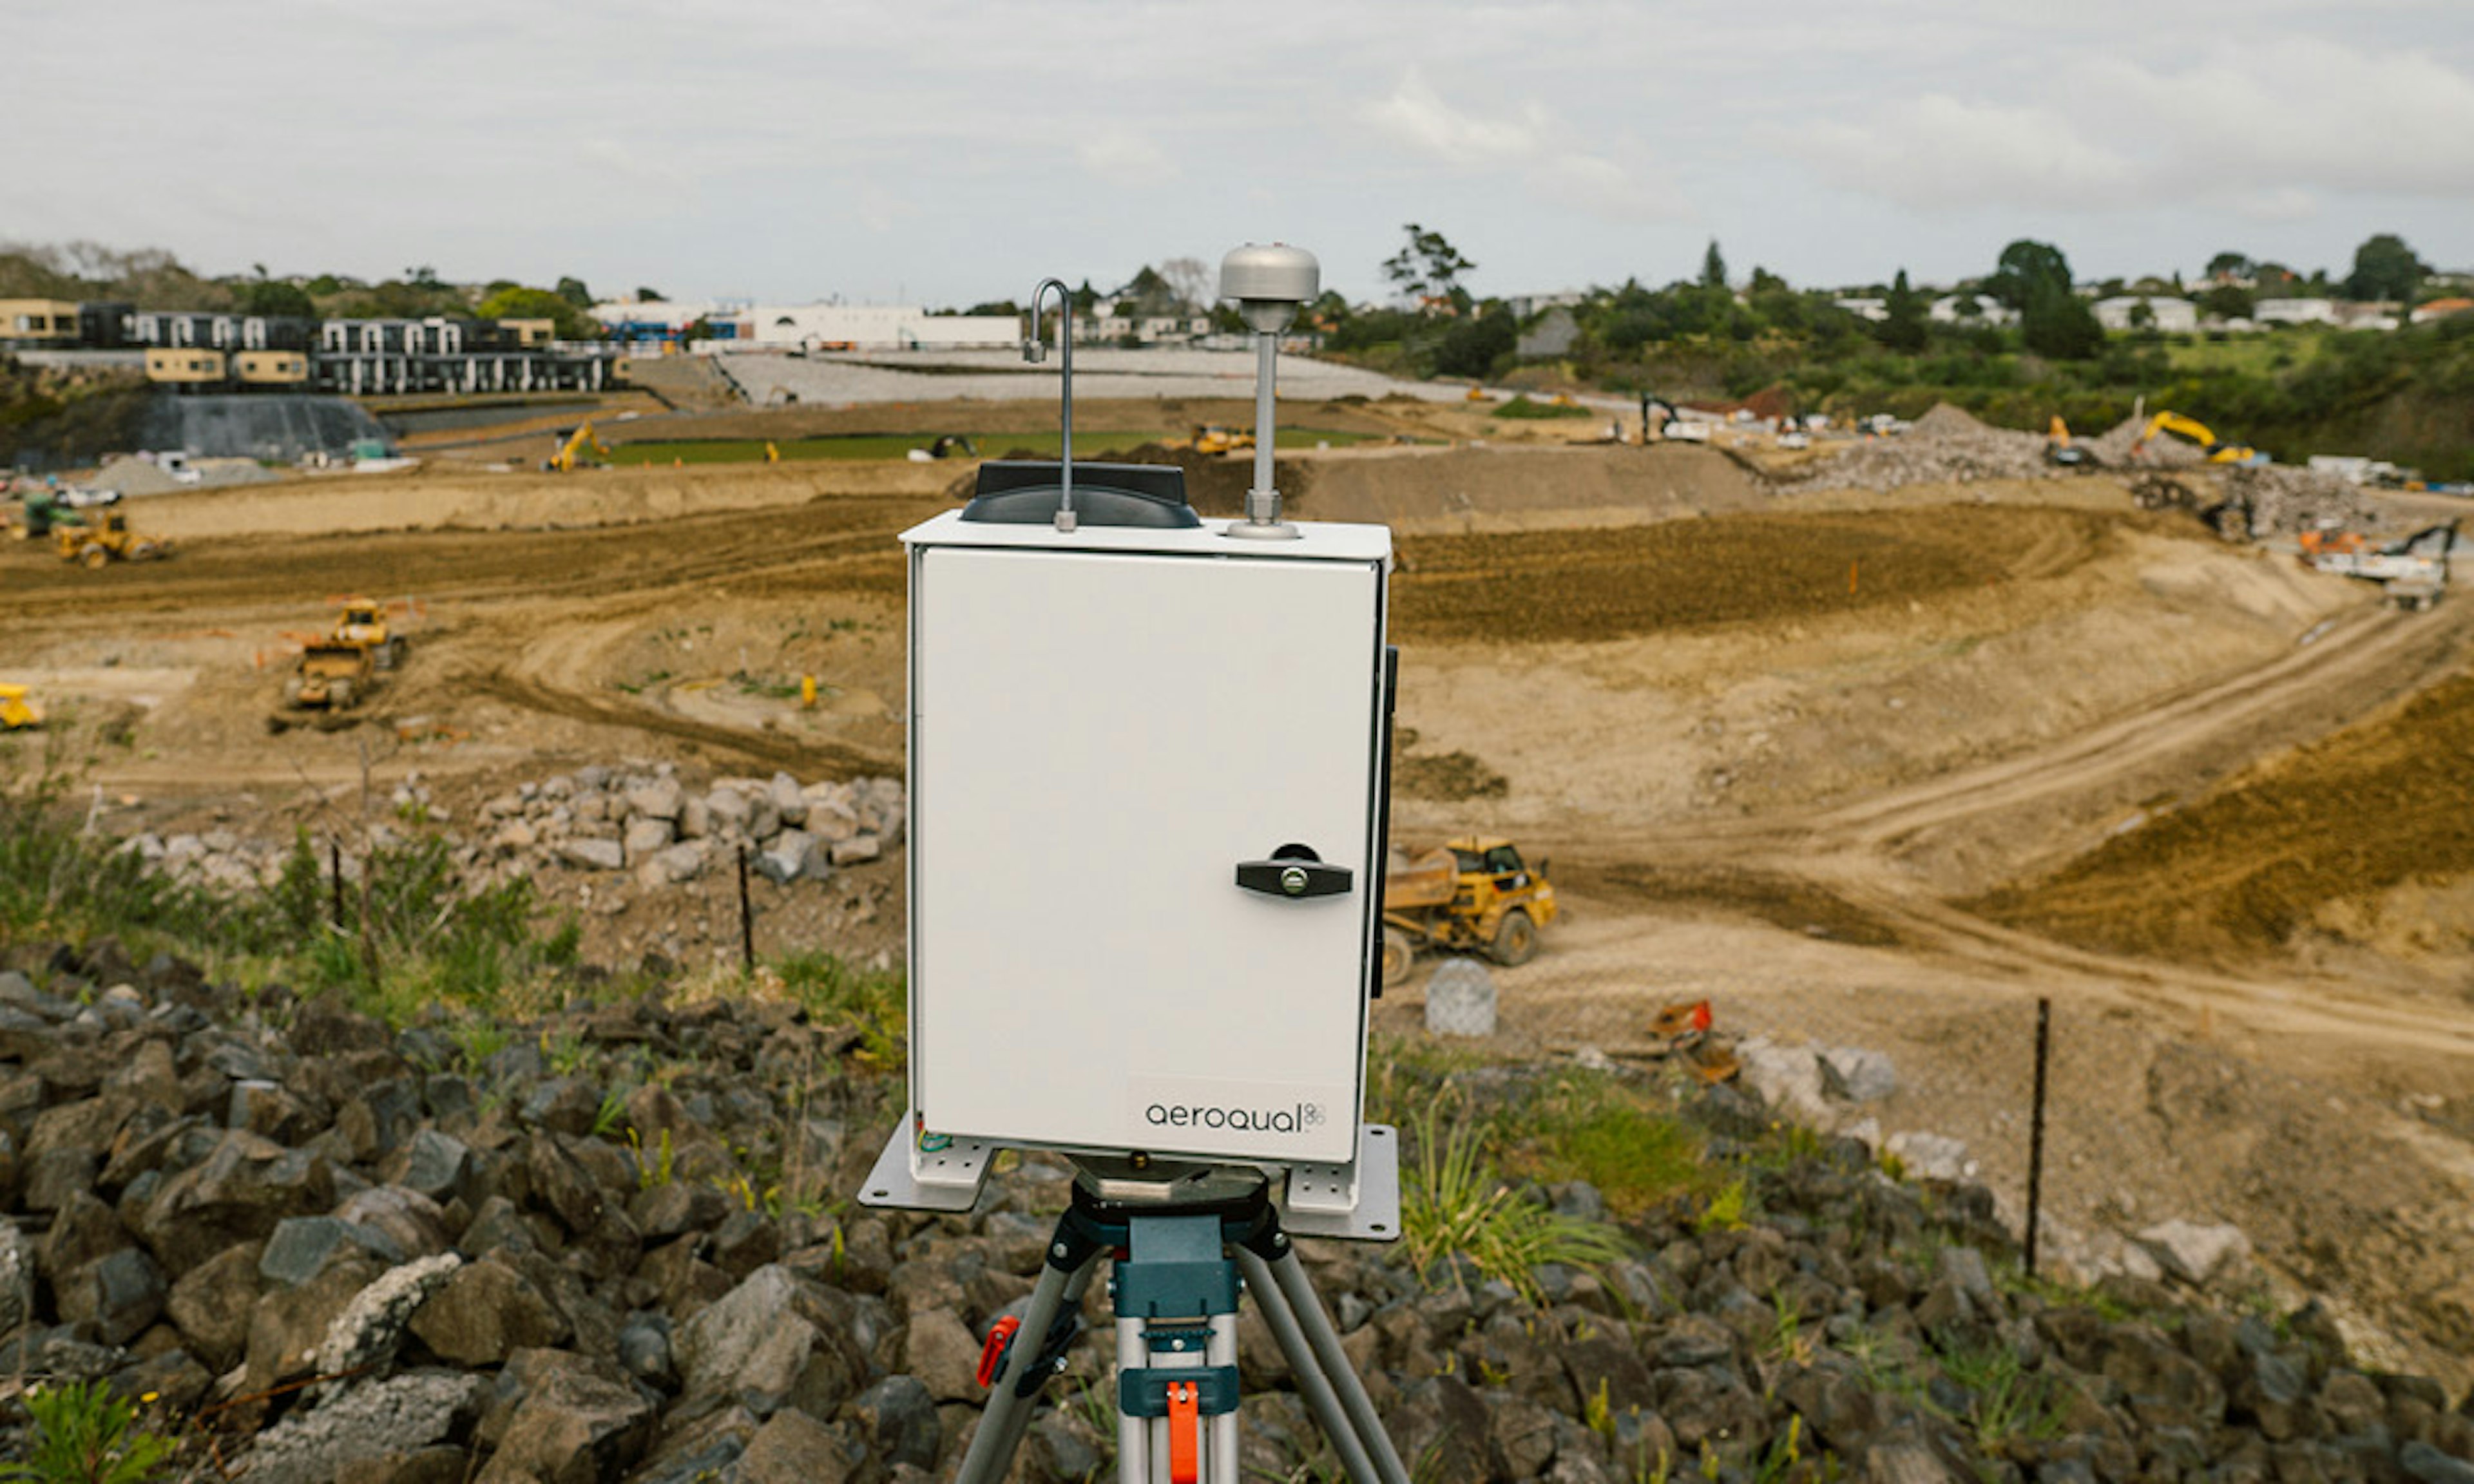 Four Aeroqual AQS monitors with Cloud software and wind were used for real-time alerts and apportioned site contributions.